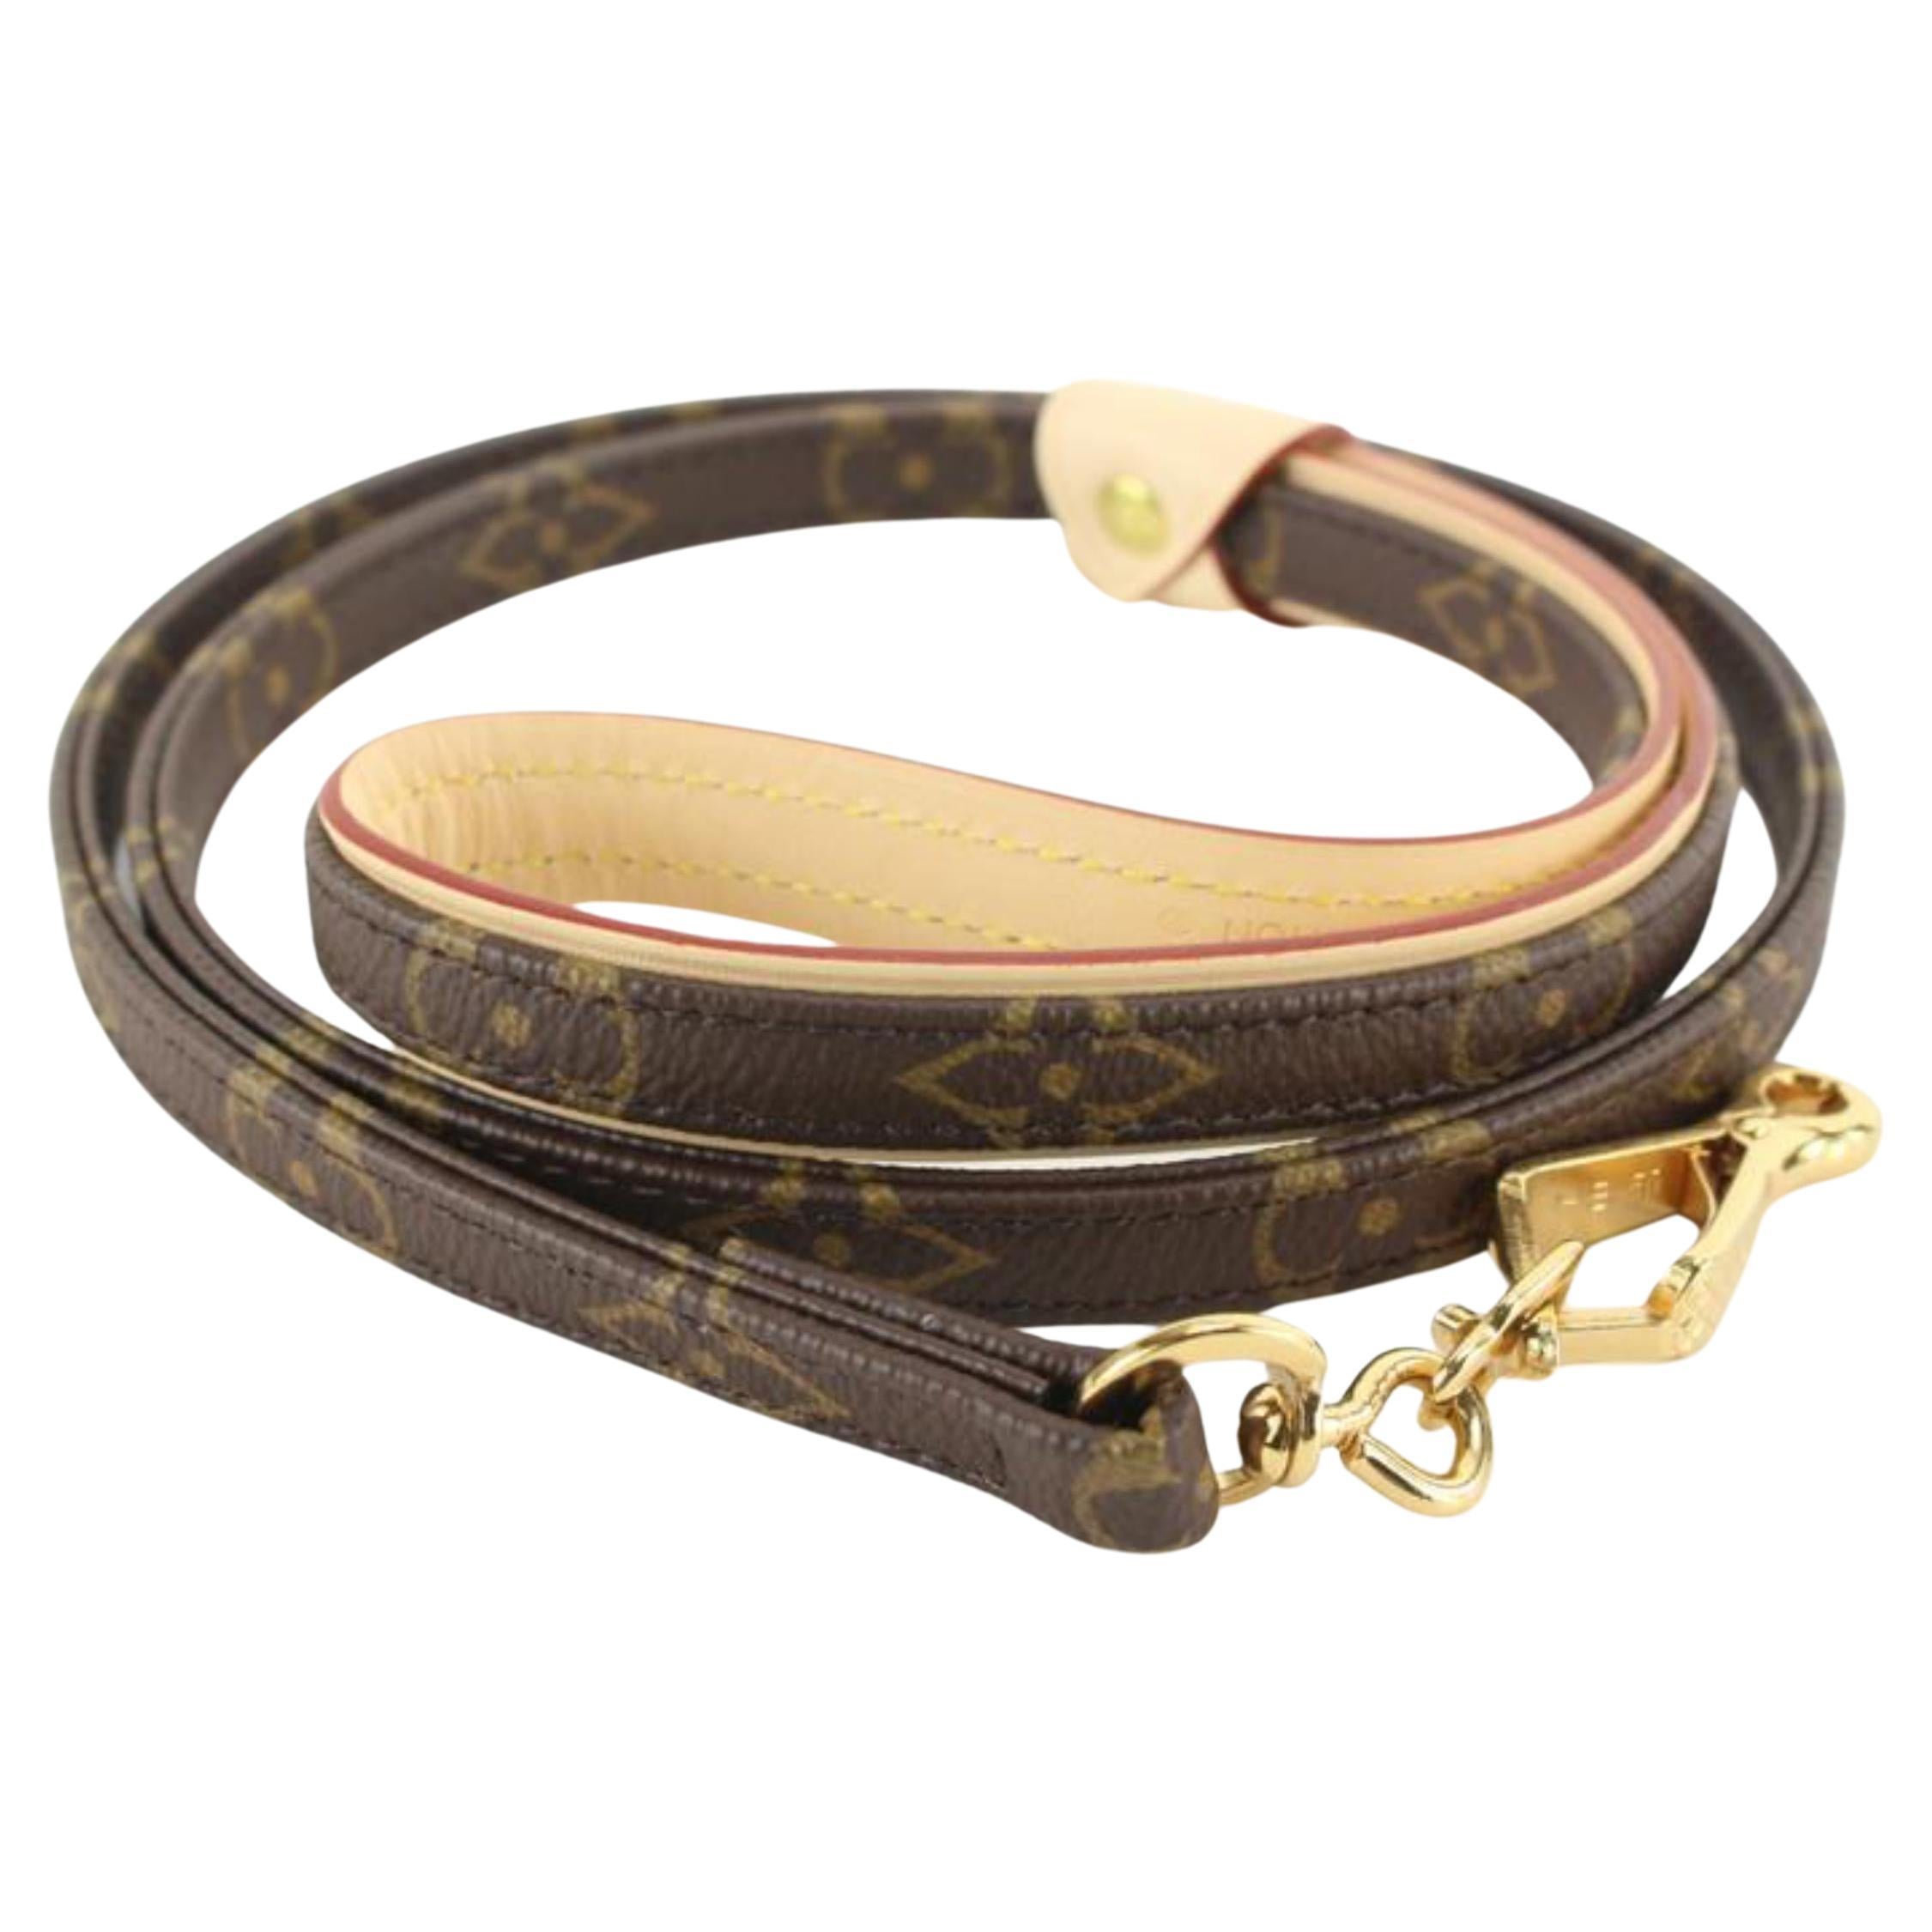 Louis Vuitton Dog Collar and Leash with Metal LV Accessory